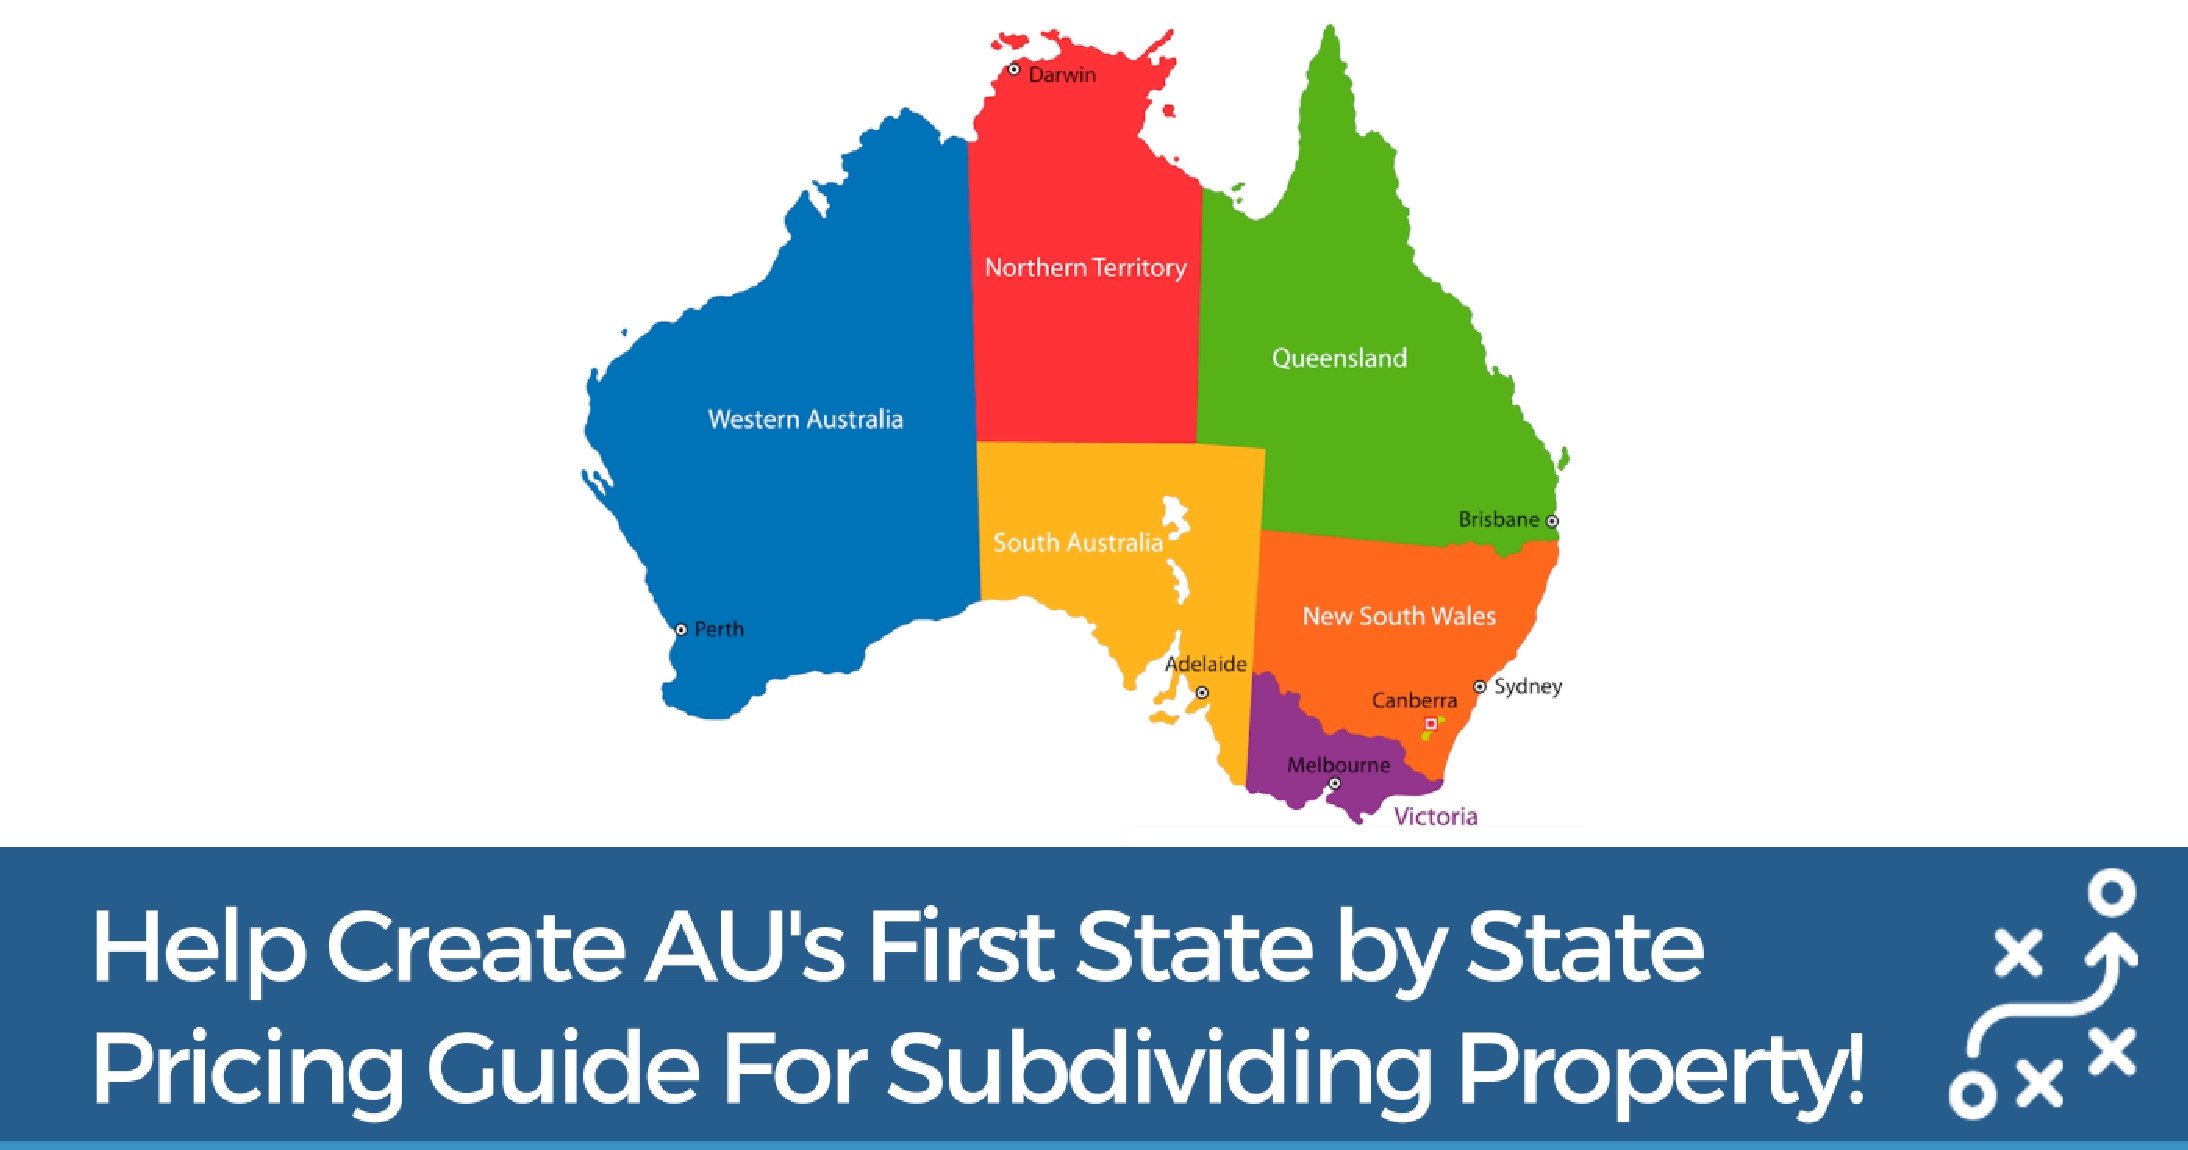 Subdivider? Help Create Australia’s First State by State Pricing Guide For Subdividing Property